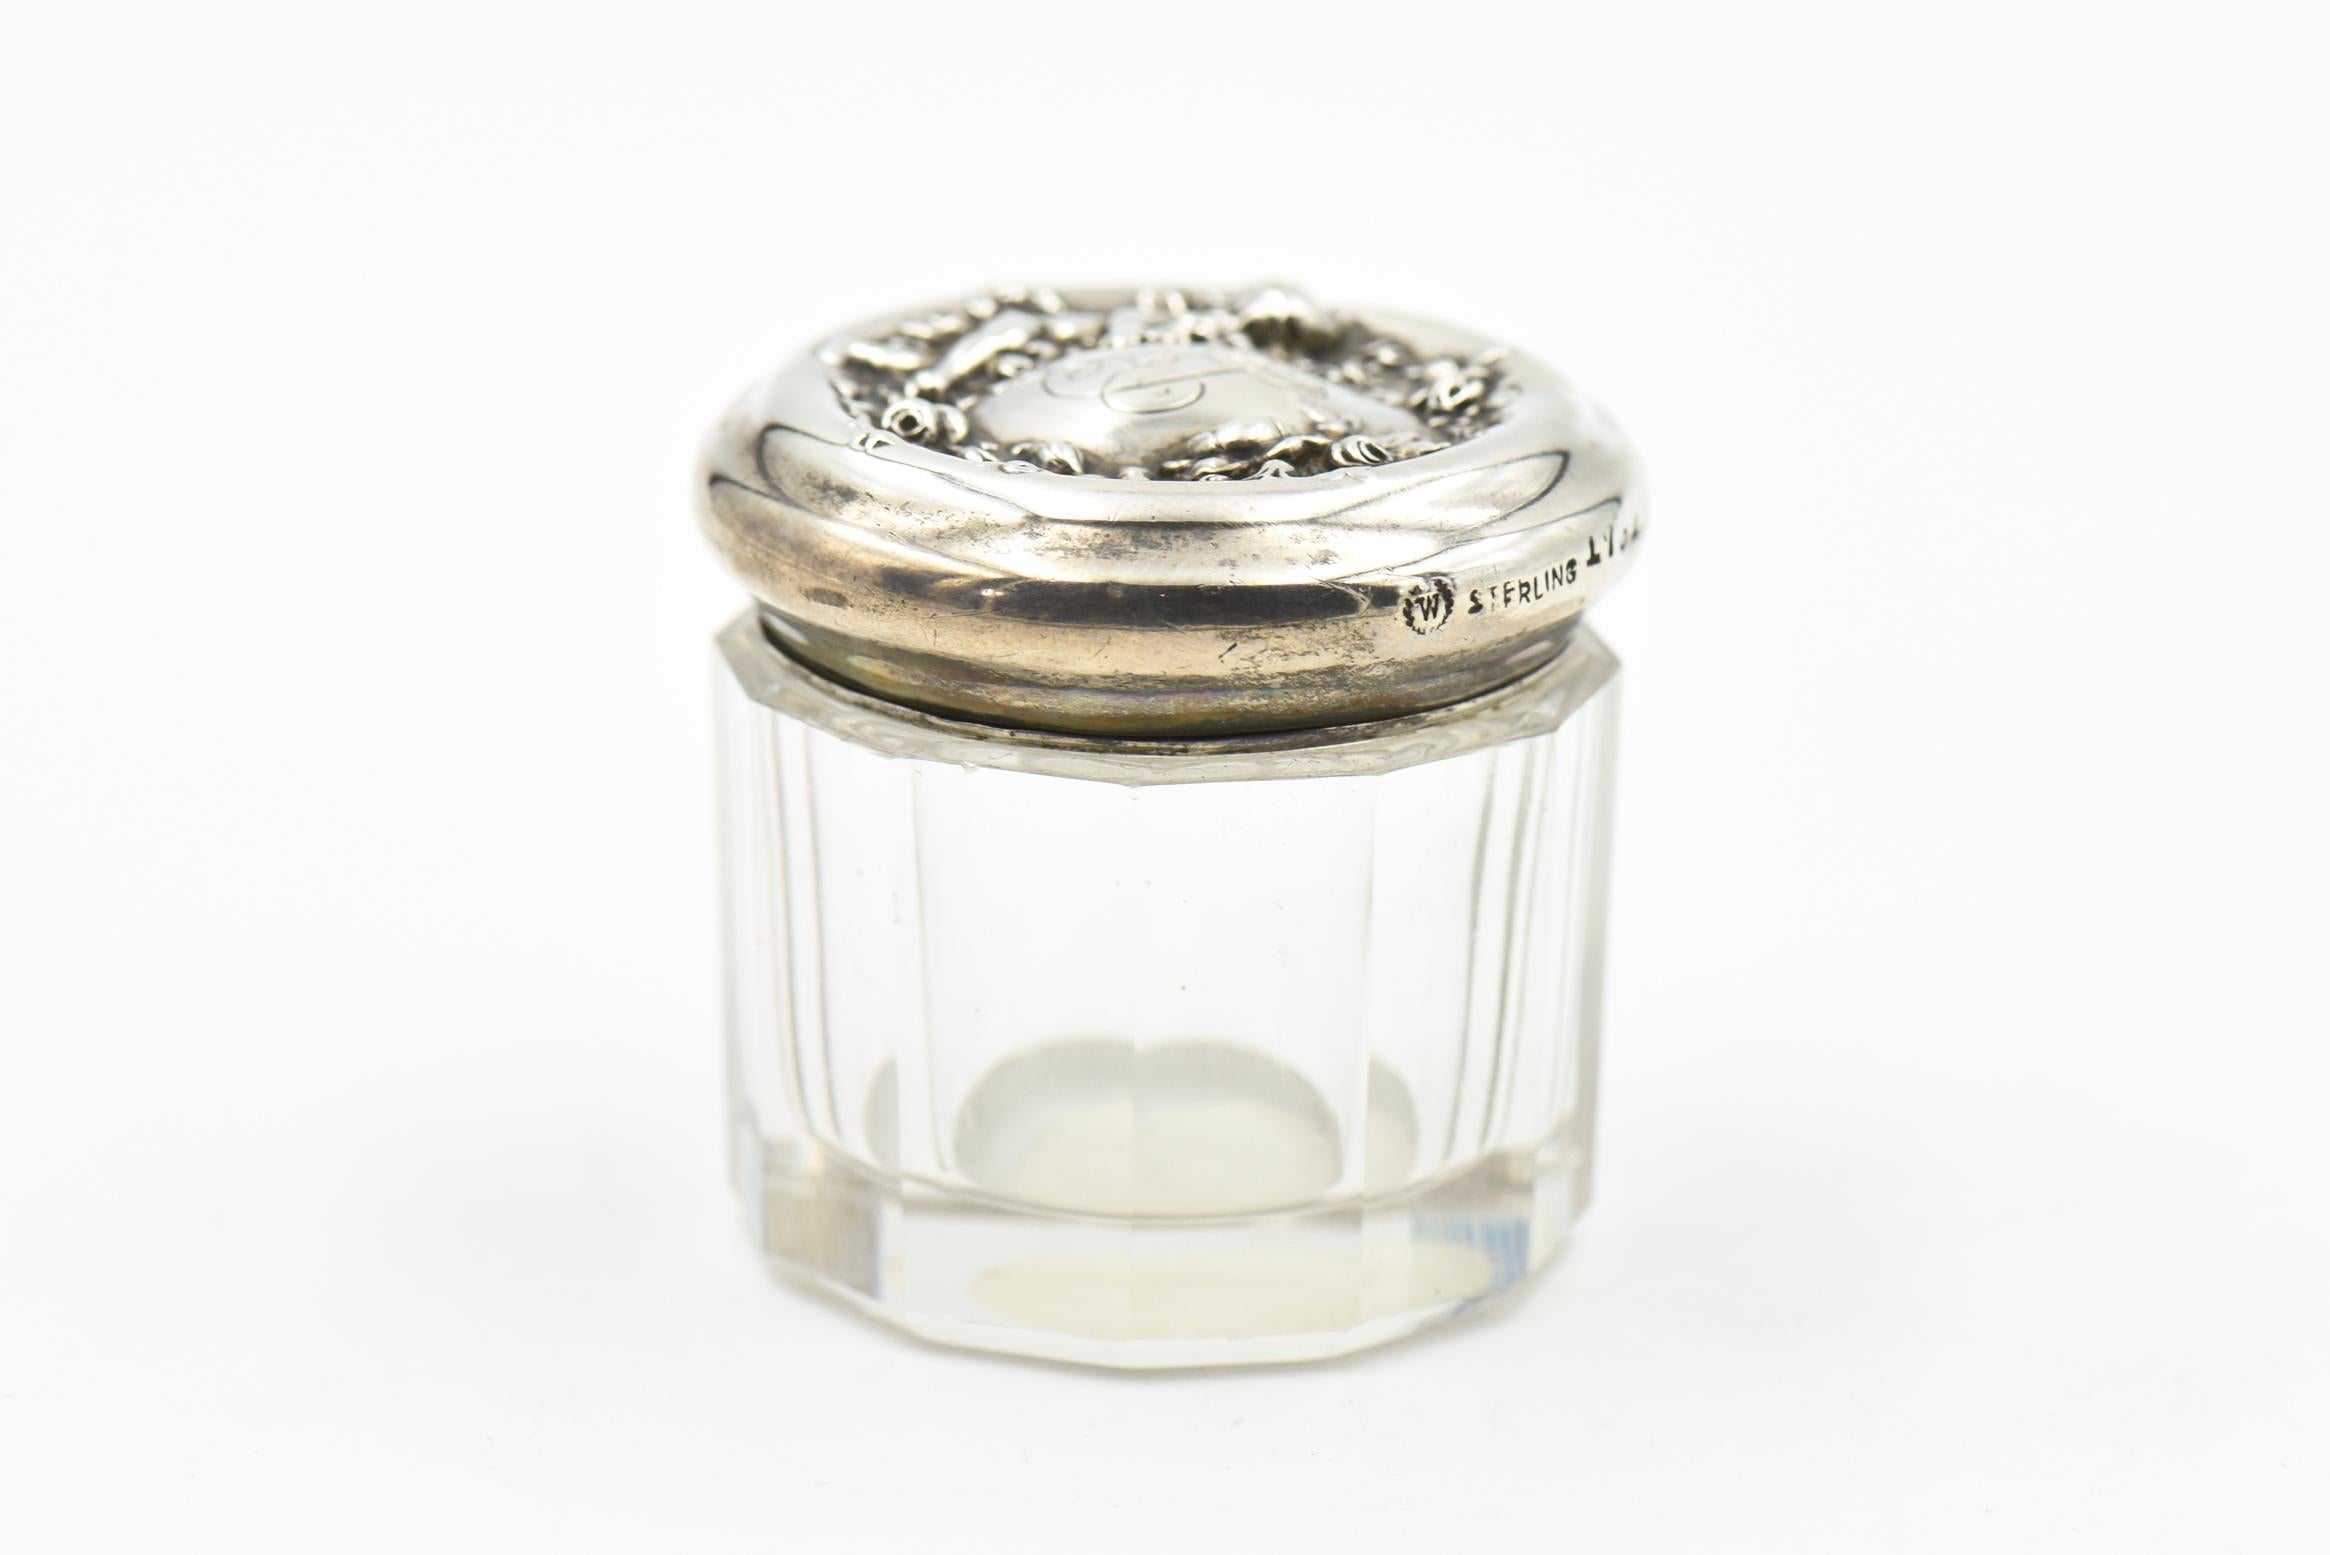 Sterling silver and beveled crystal dresser jar from the Art Nouveau Era, made by fine American silver maker, Woodside. The jar is features a child hugging flowers on the side of a floral wreath. The jar measures 1.5